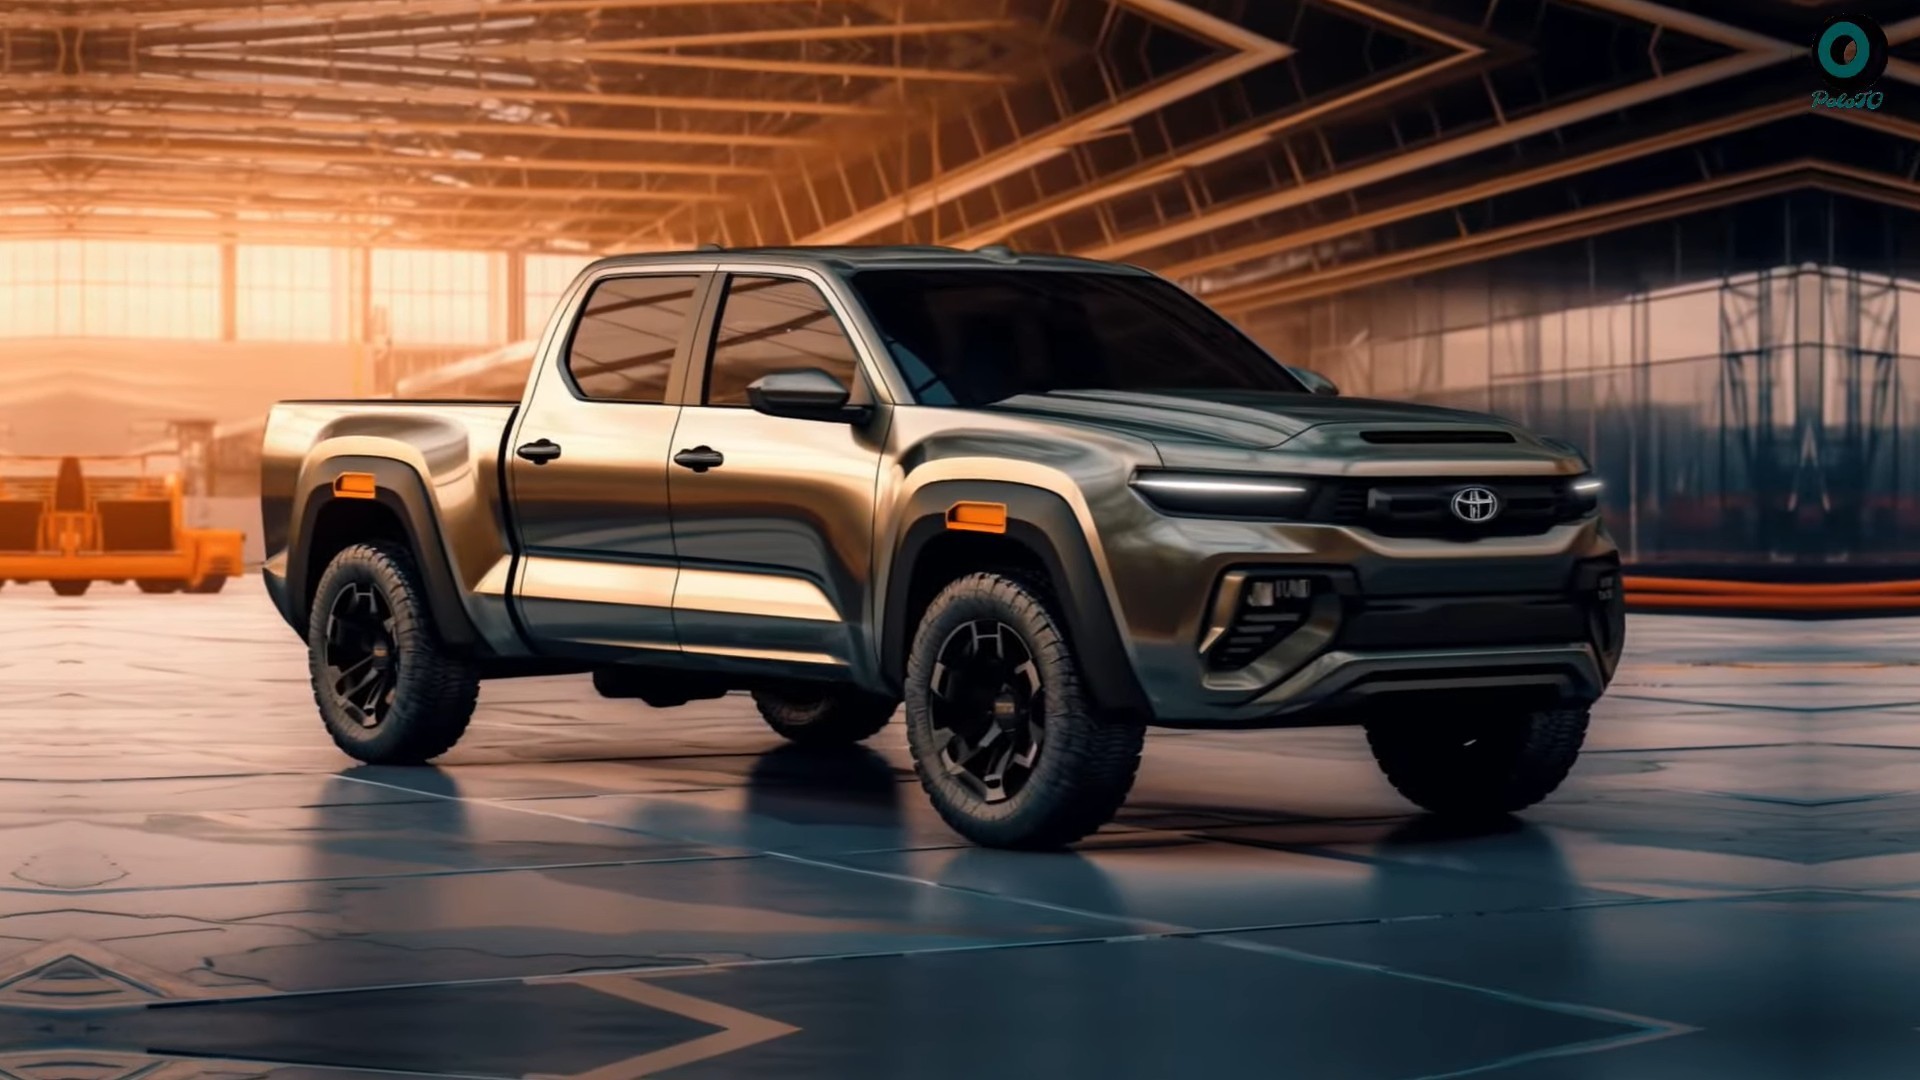 https://s1.cdn.autoevolution.com/images/news/gallery/all-new-2025-toyota-hilux-shines-brightly-with-a-bolder-yet-unofficial-styling_3.jpg